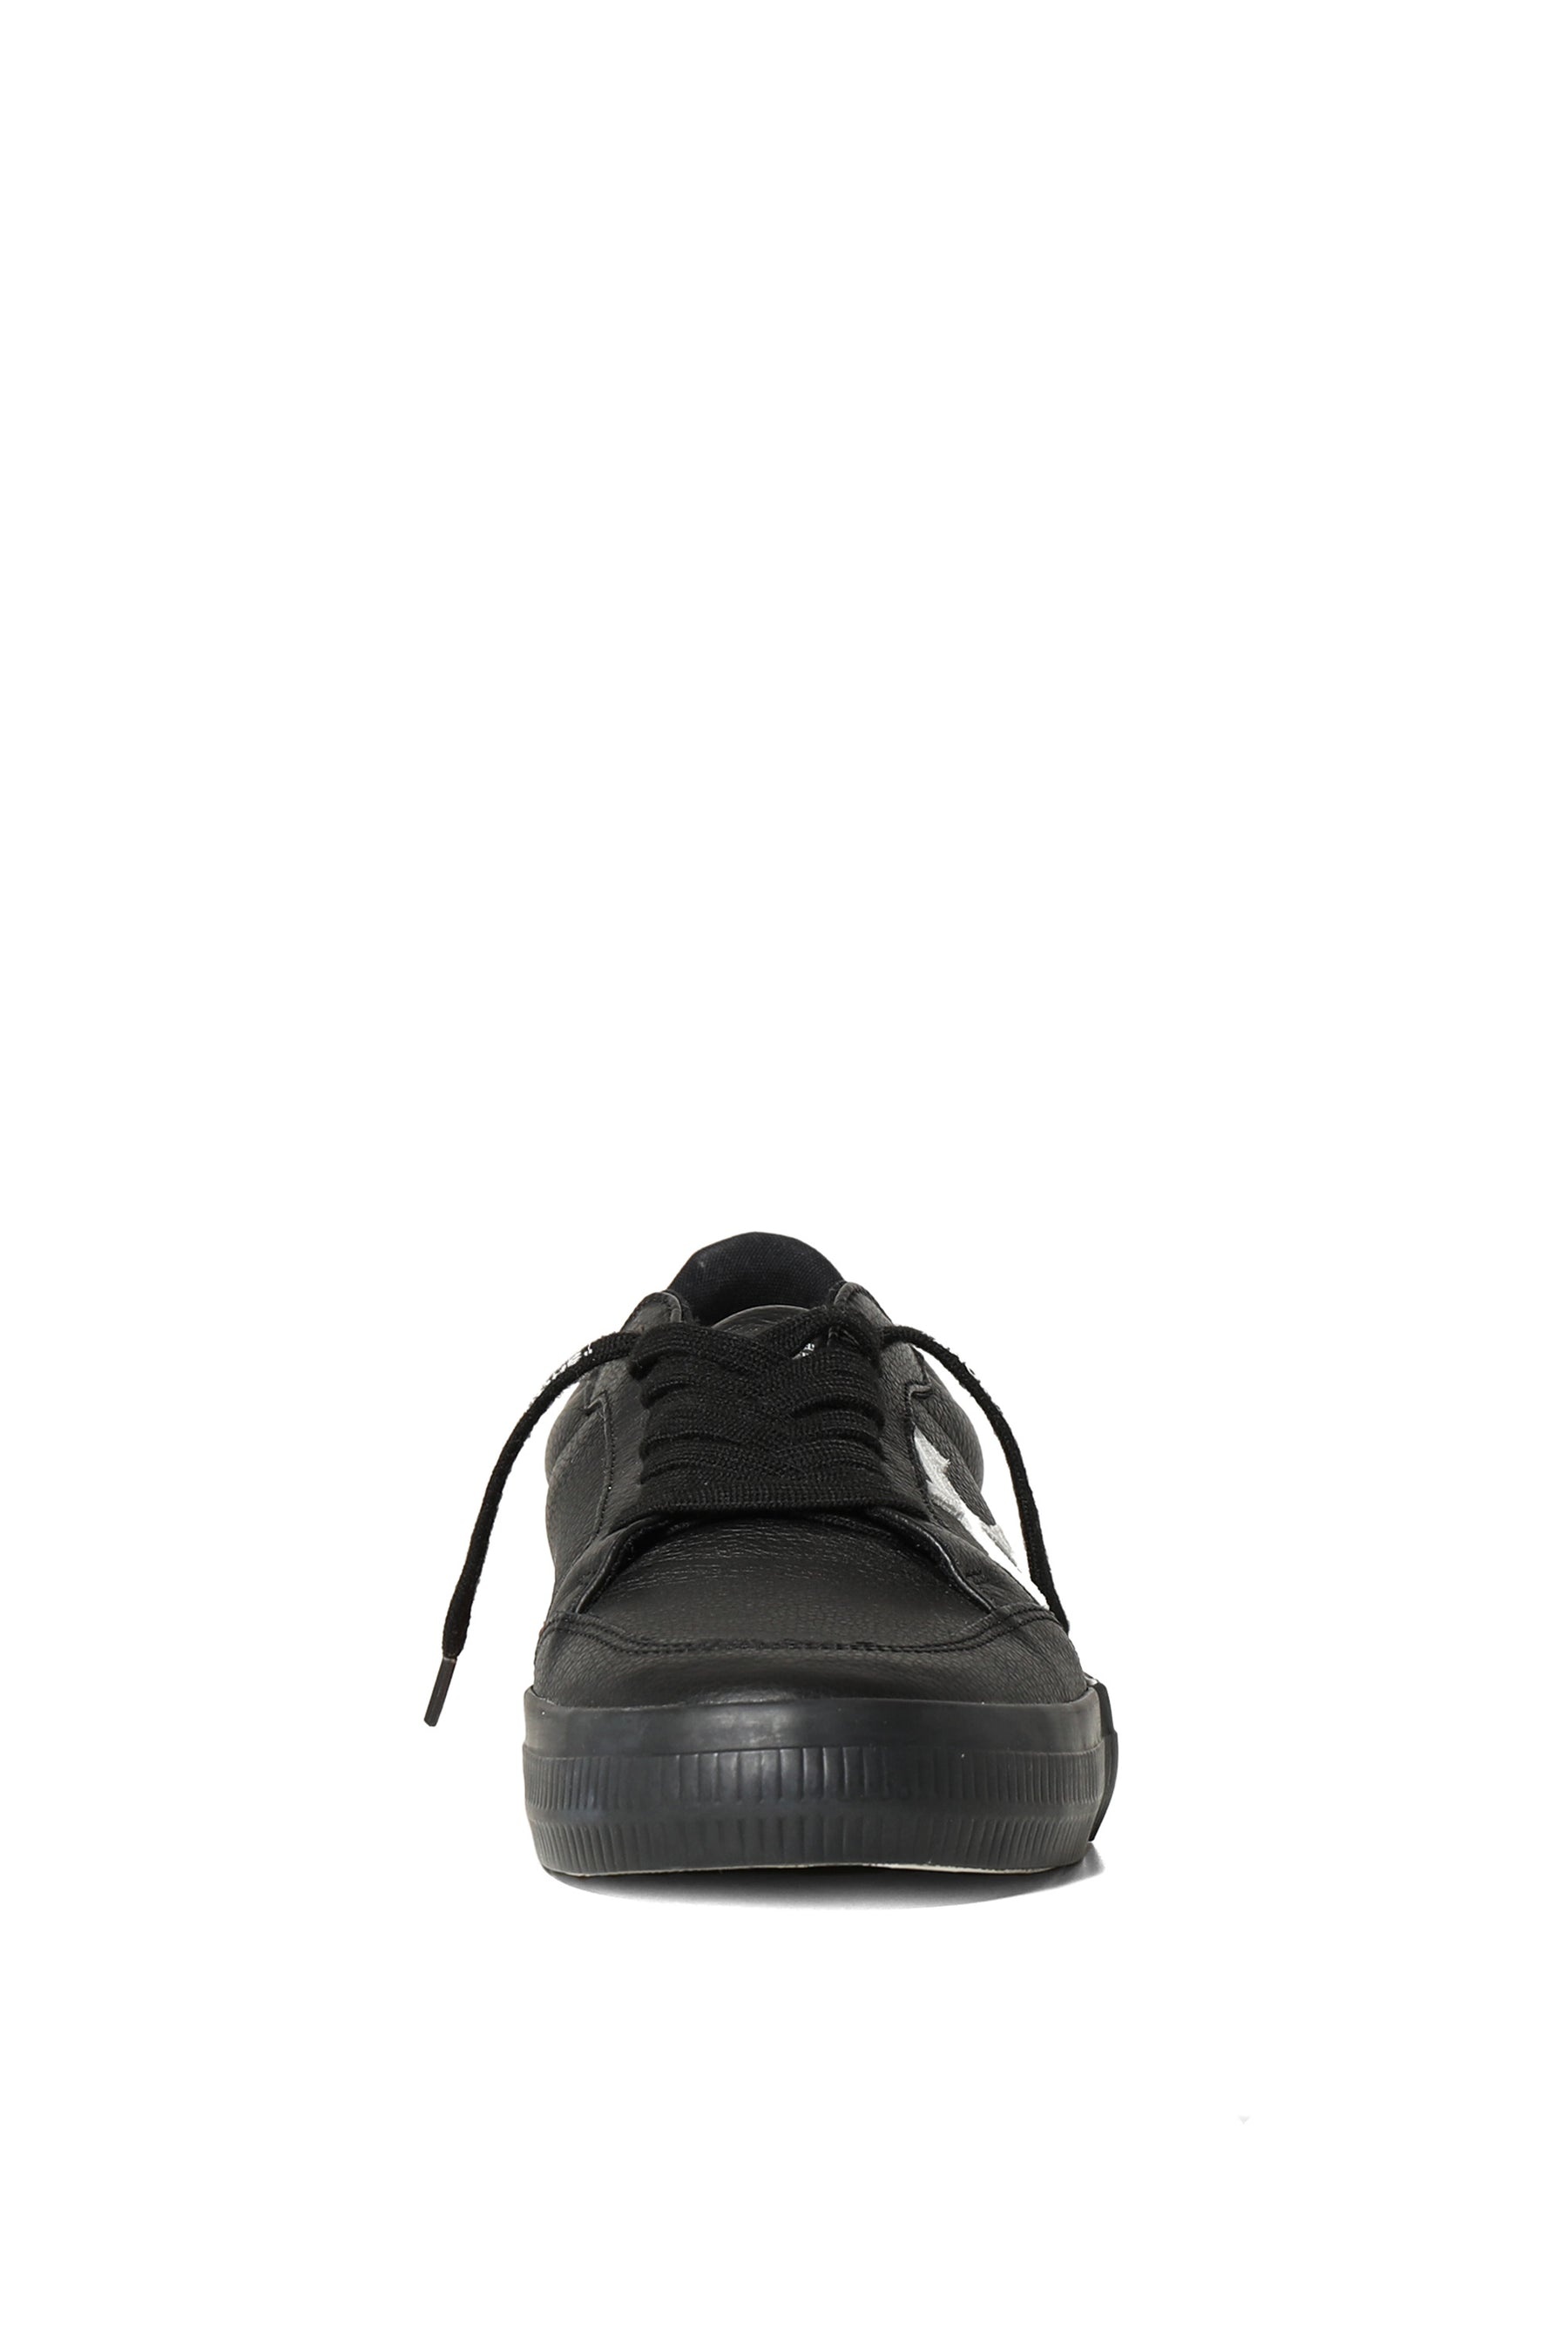 LOW VULCANIZED CALF LEATHER / BLK WHT - 3